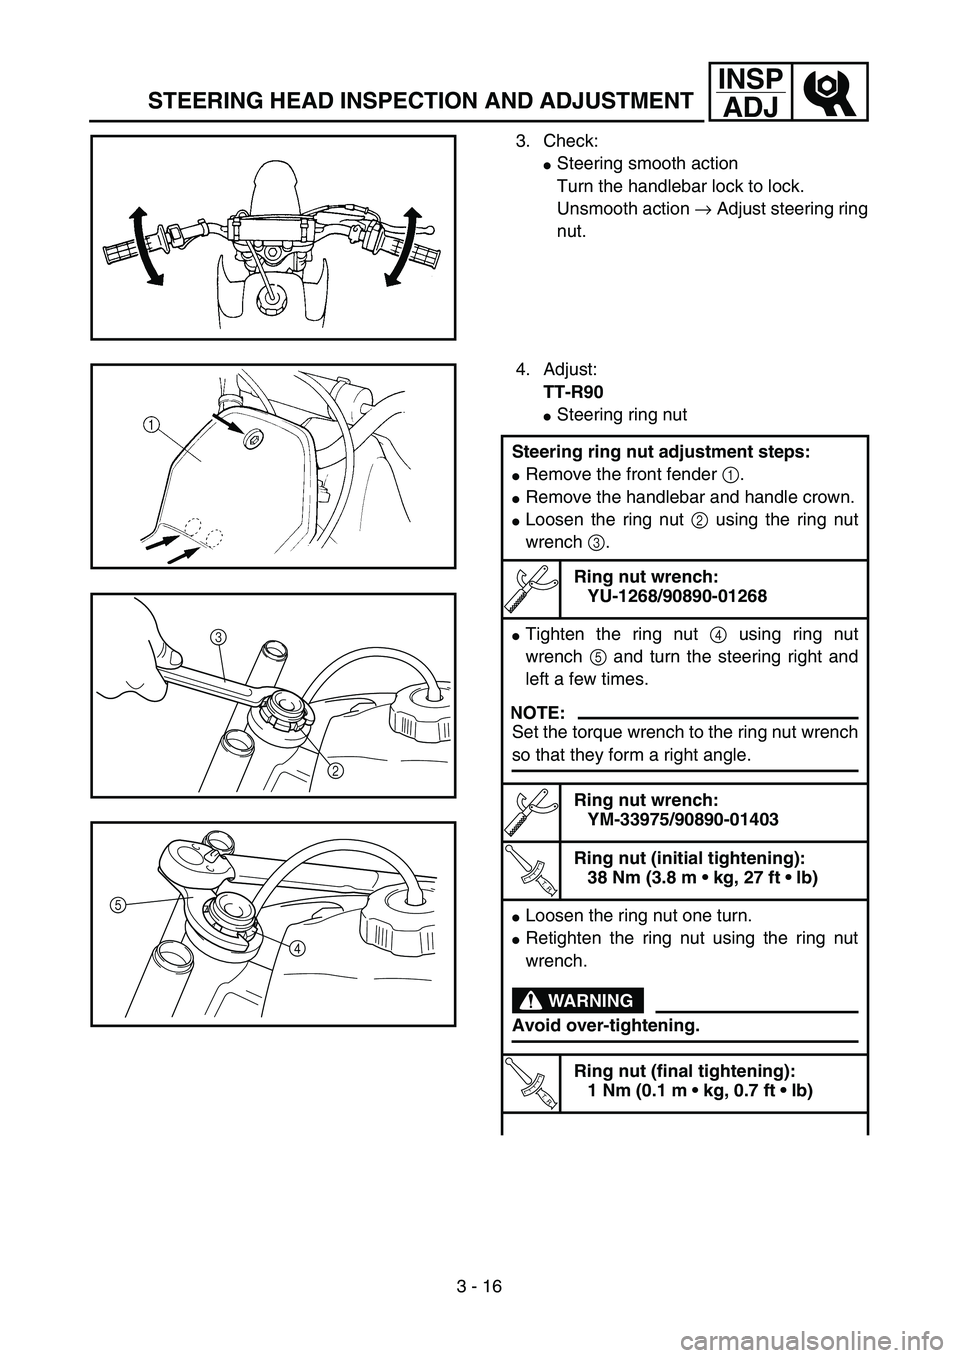 YAMAHA TTR90 2005  Notices Demploi (in French) 3 - 16
INSP
ADJ
STEERING HEAD INSPECTION AND ADJUSTMENT
3. Check:
Steering smooth action
Turn the handlebar lock to lock.
Unsmooth action → Adjust steering ring
nut.
4. Adjust:
TT-R90
Steering rin